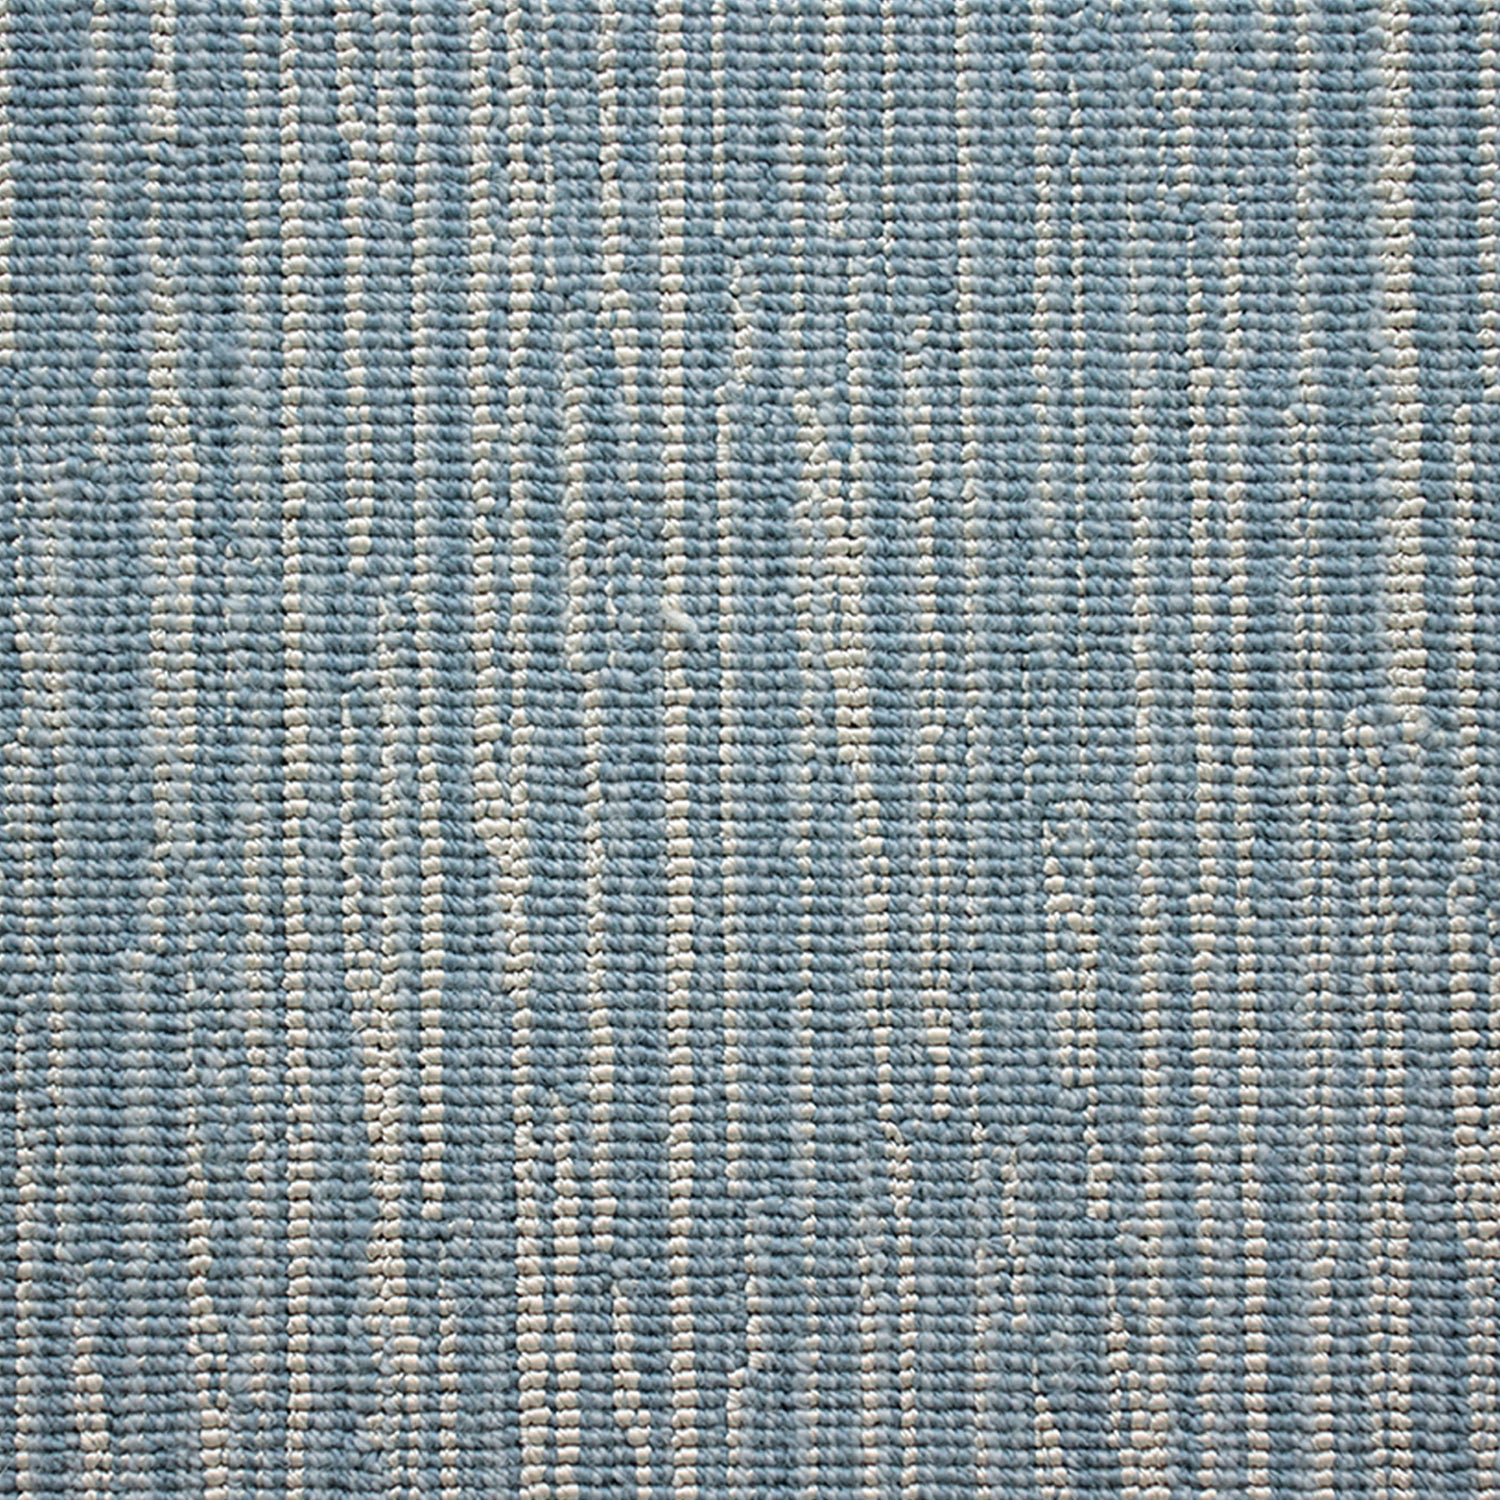 Wool-blend broadloom carpet swatch in a mottled stripe print in shades of blue and cream.